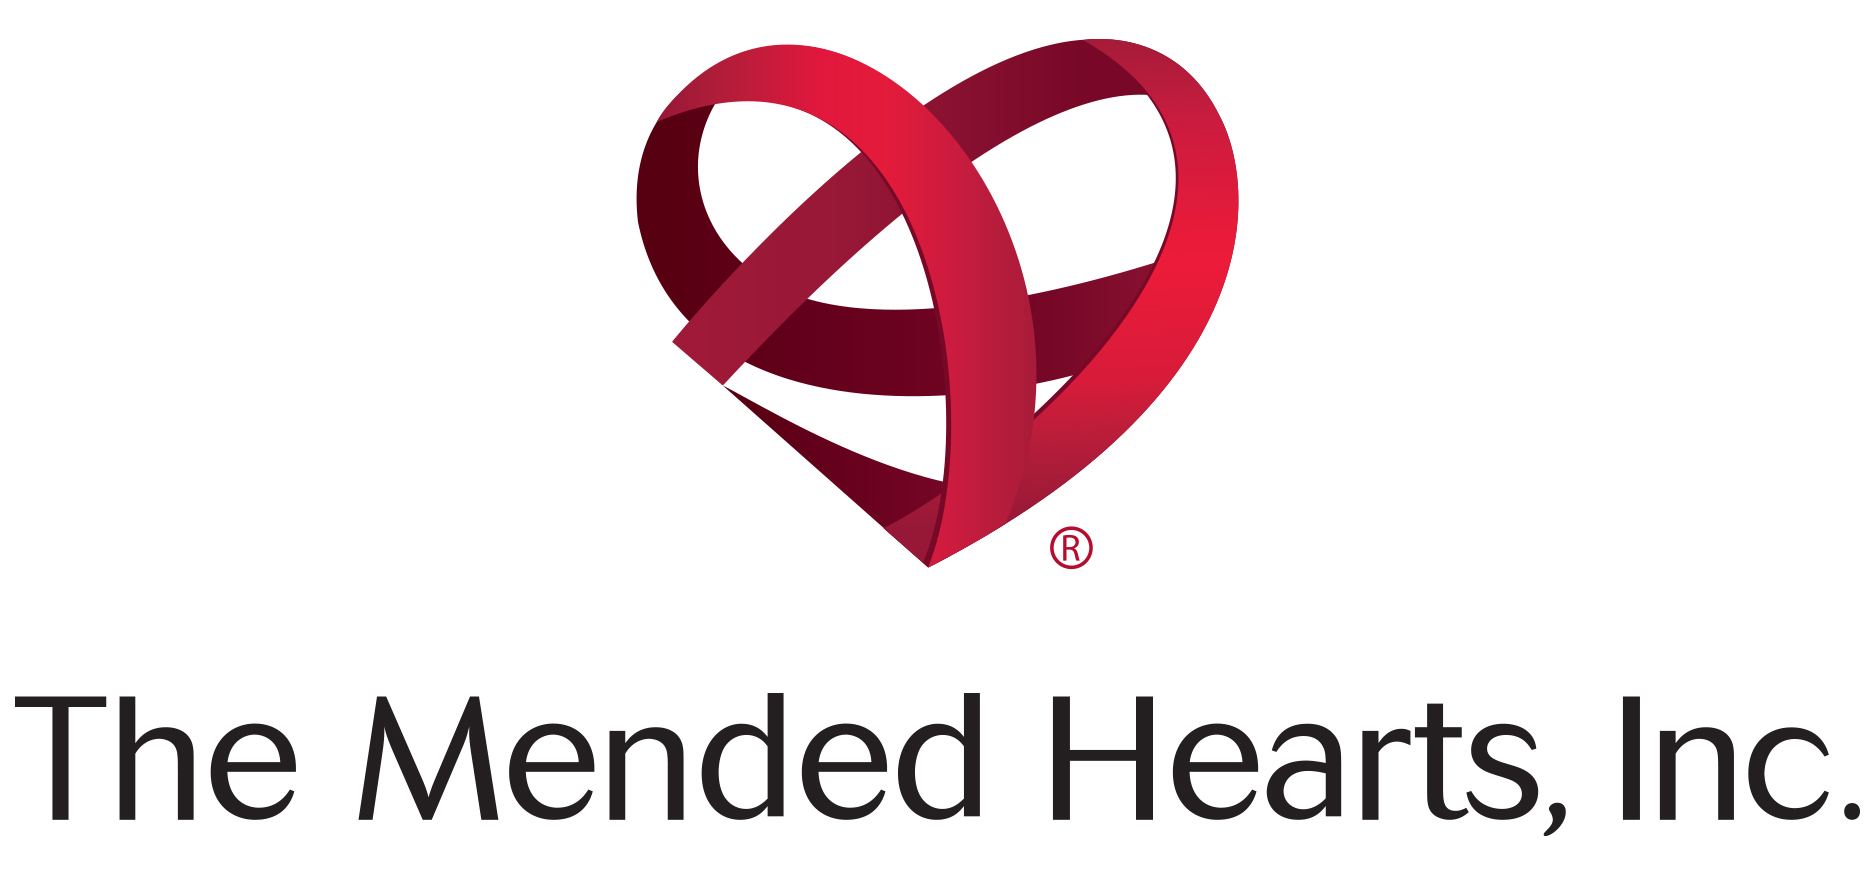 The Mended Hearts, Inc.